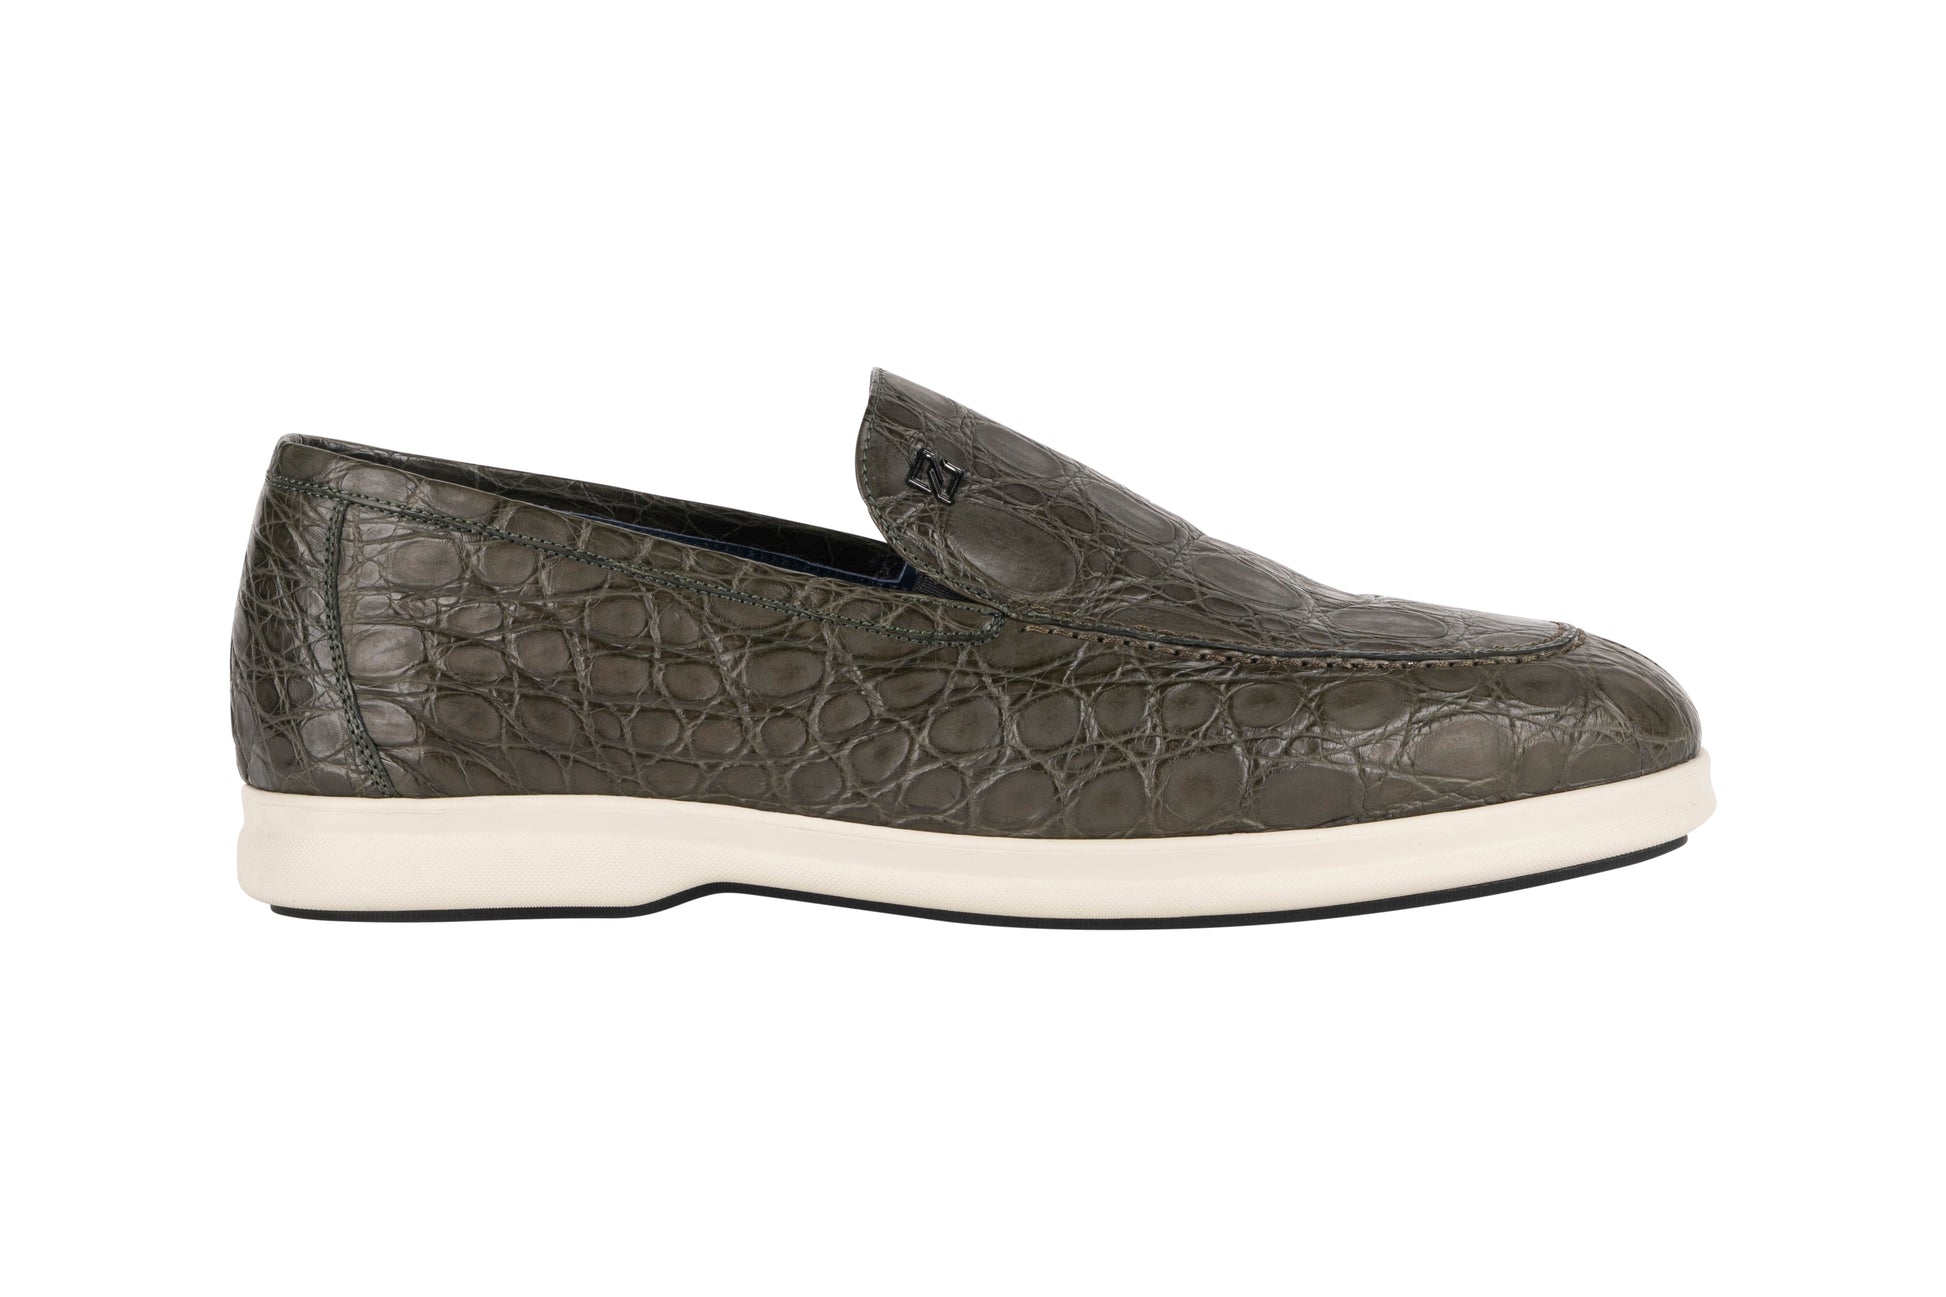 Caiman Loafers - ZILLI